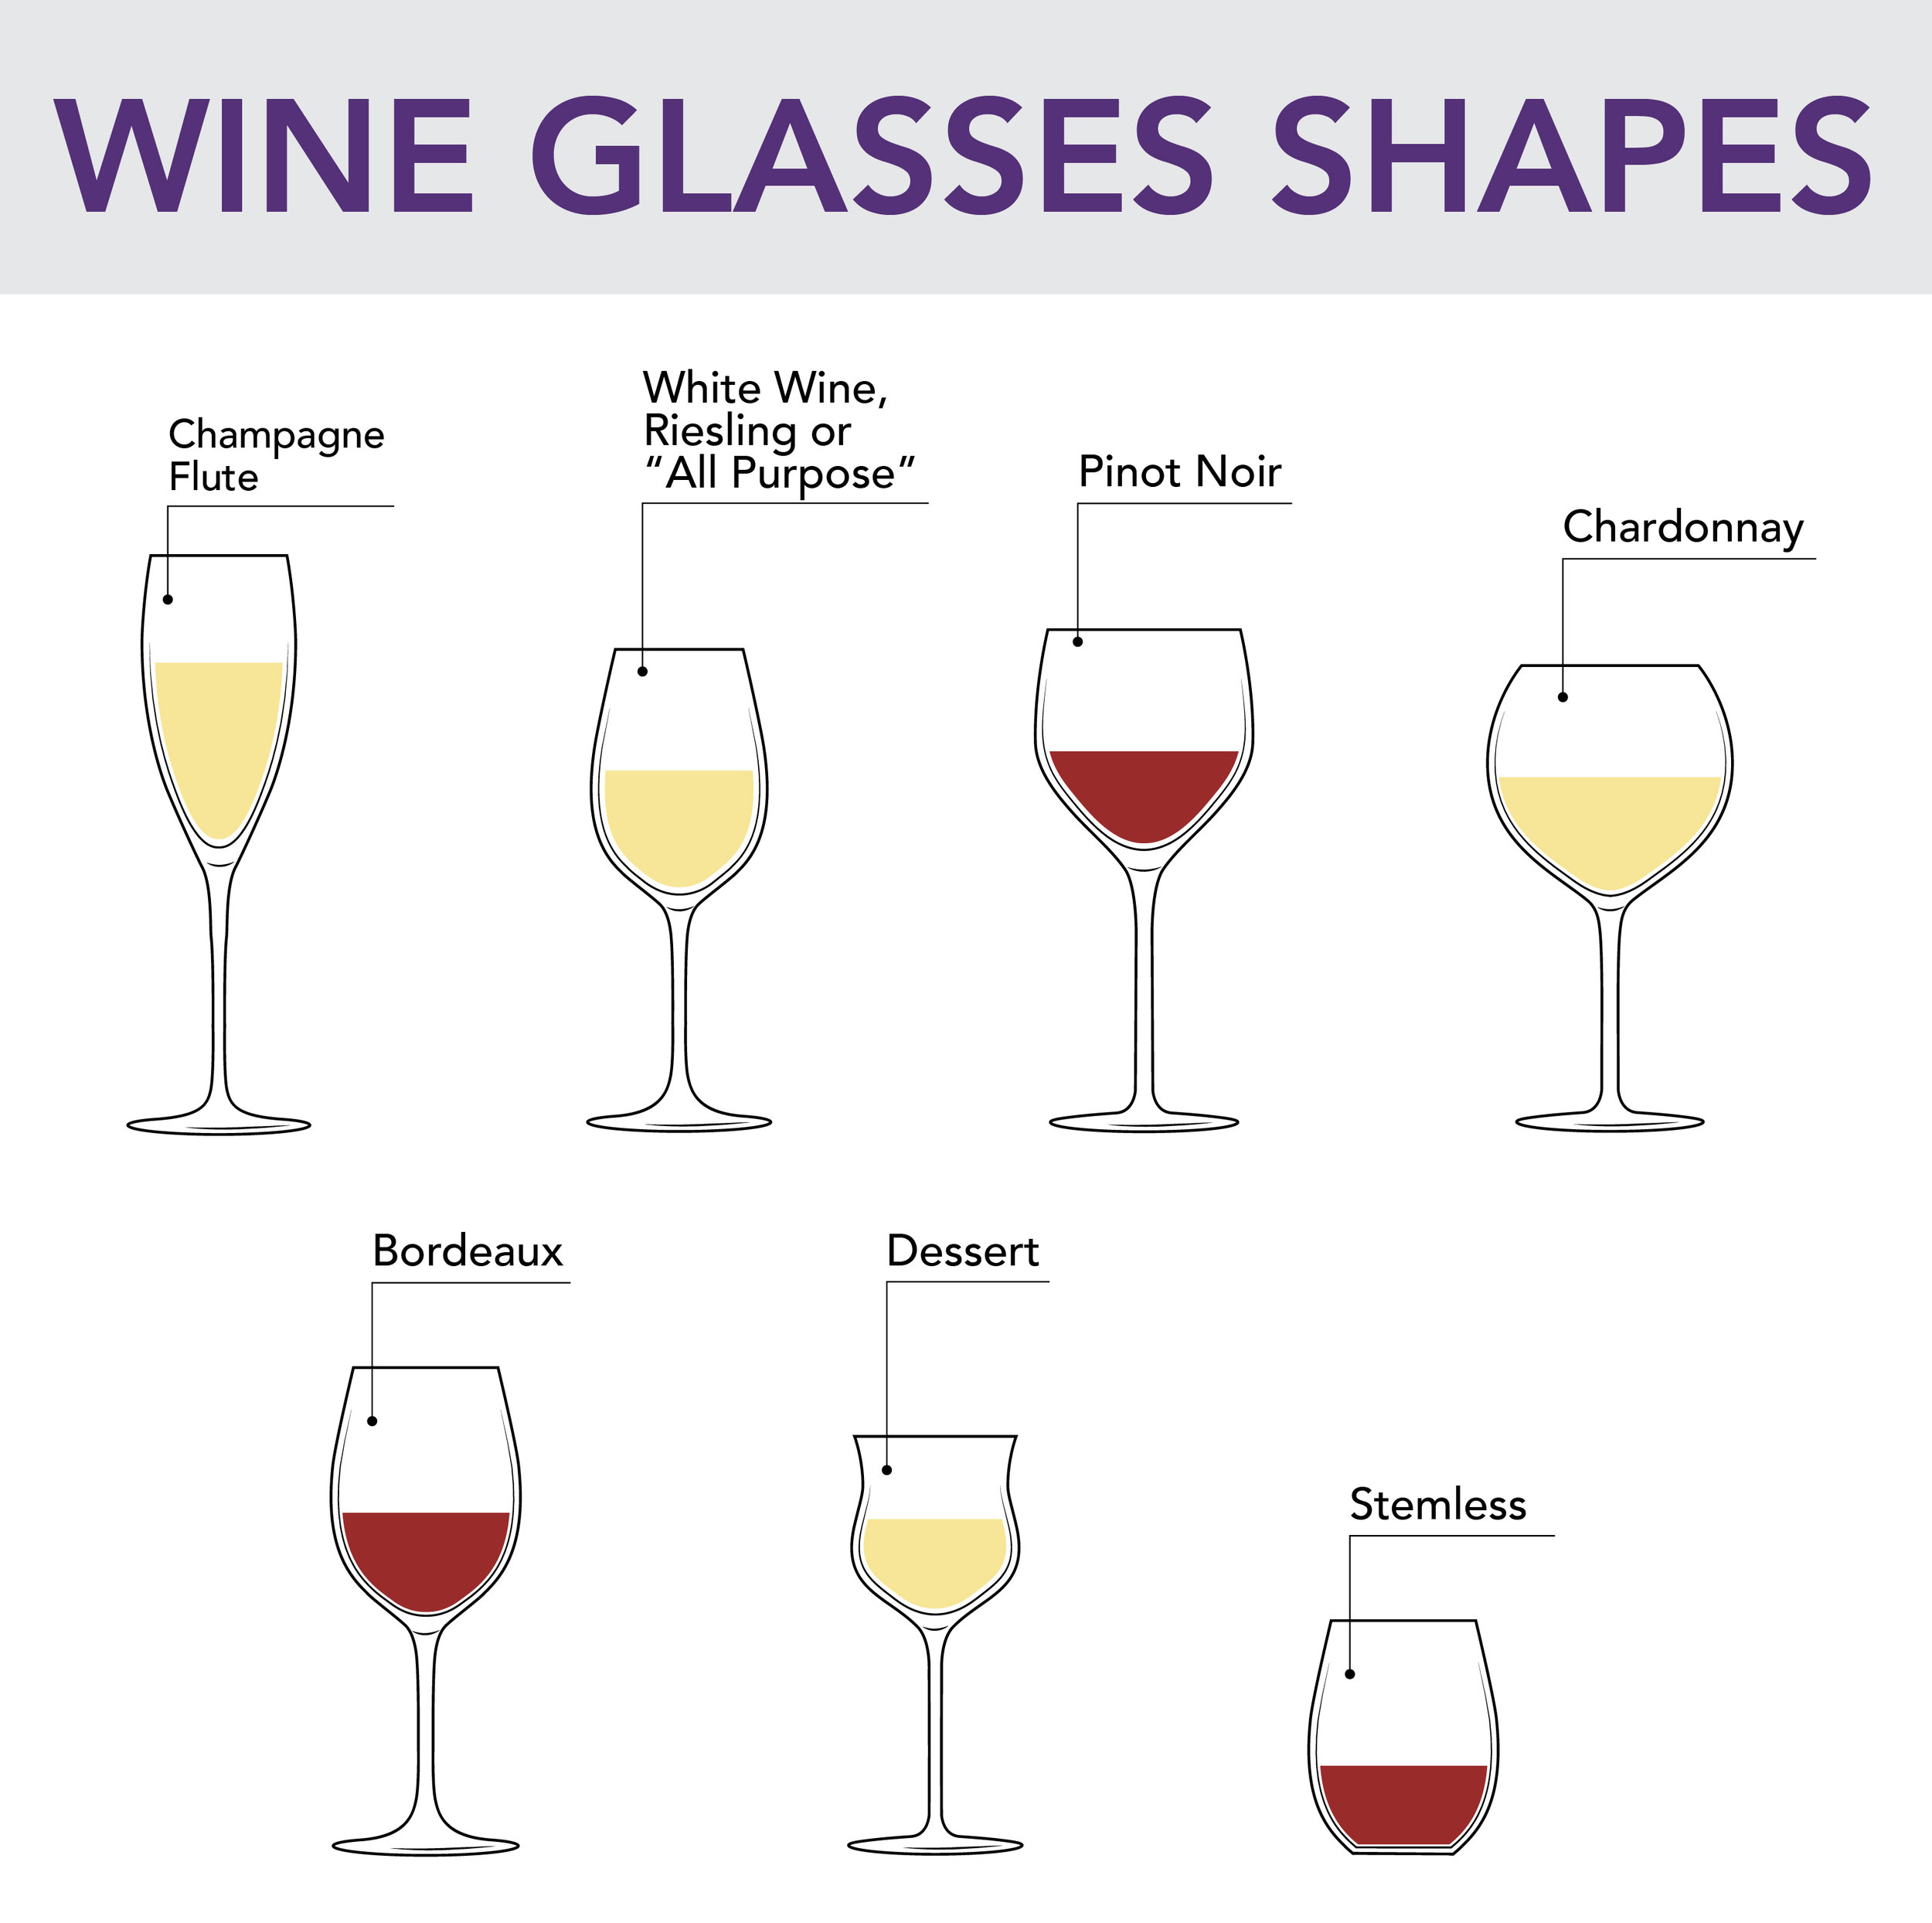 Wine Glasses: Shapes, Stems, Cleaning, and Care - From The Vine